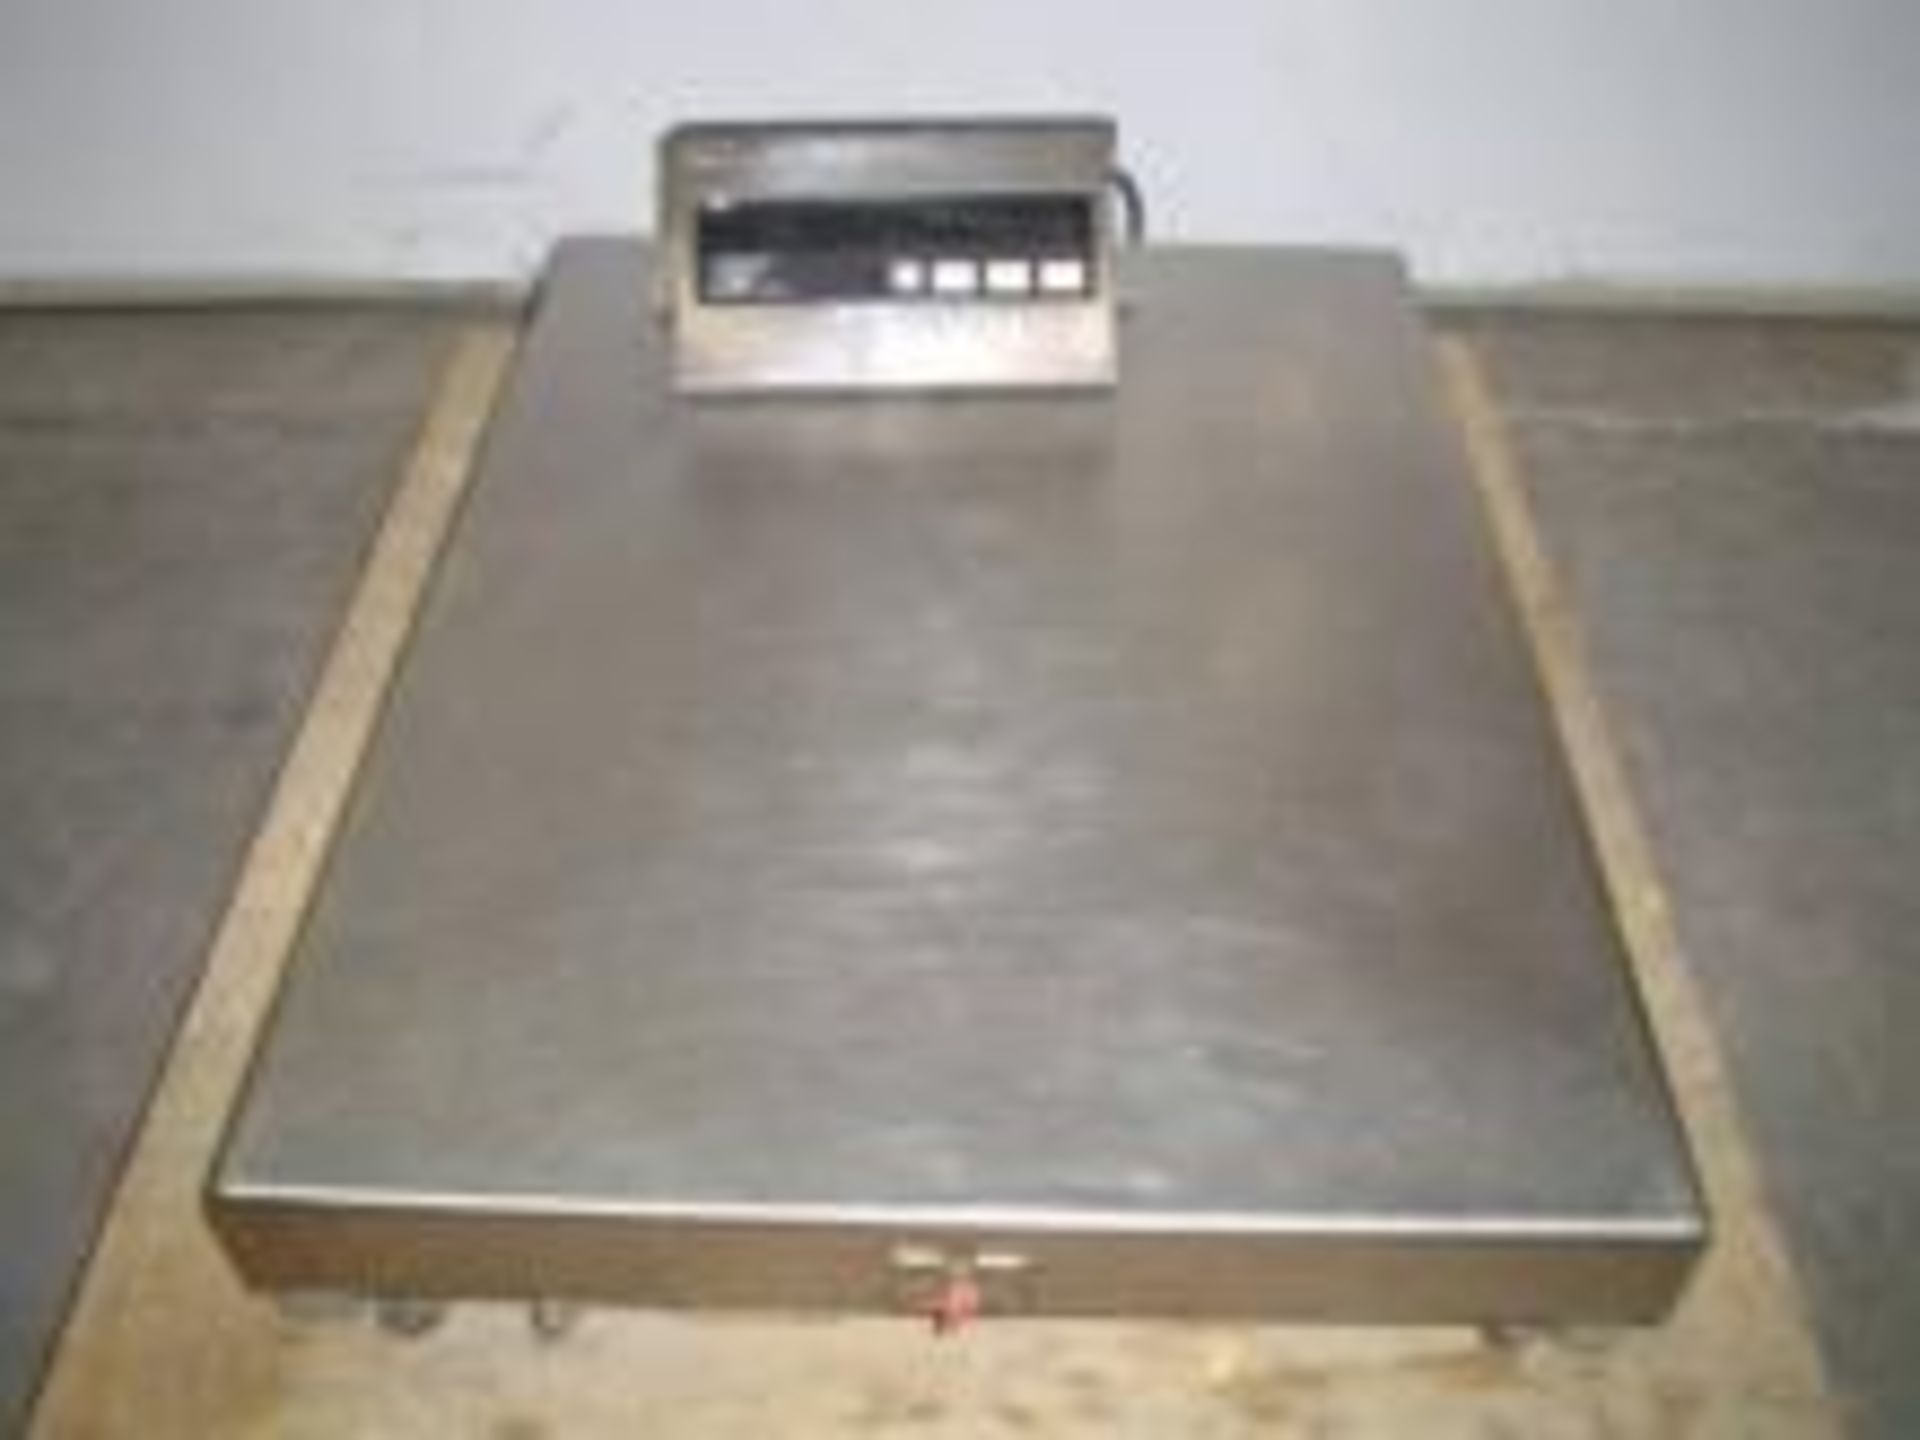 Used Toledo 150 Kg Digital Floor Scale, Model ID1s.   Electrics: 110 volts. Load Out Fee:150